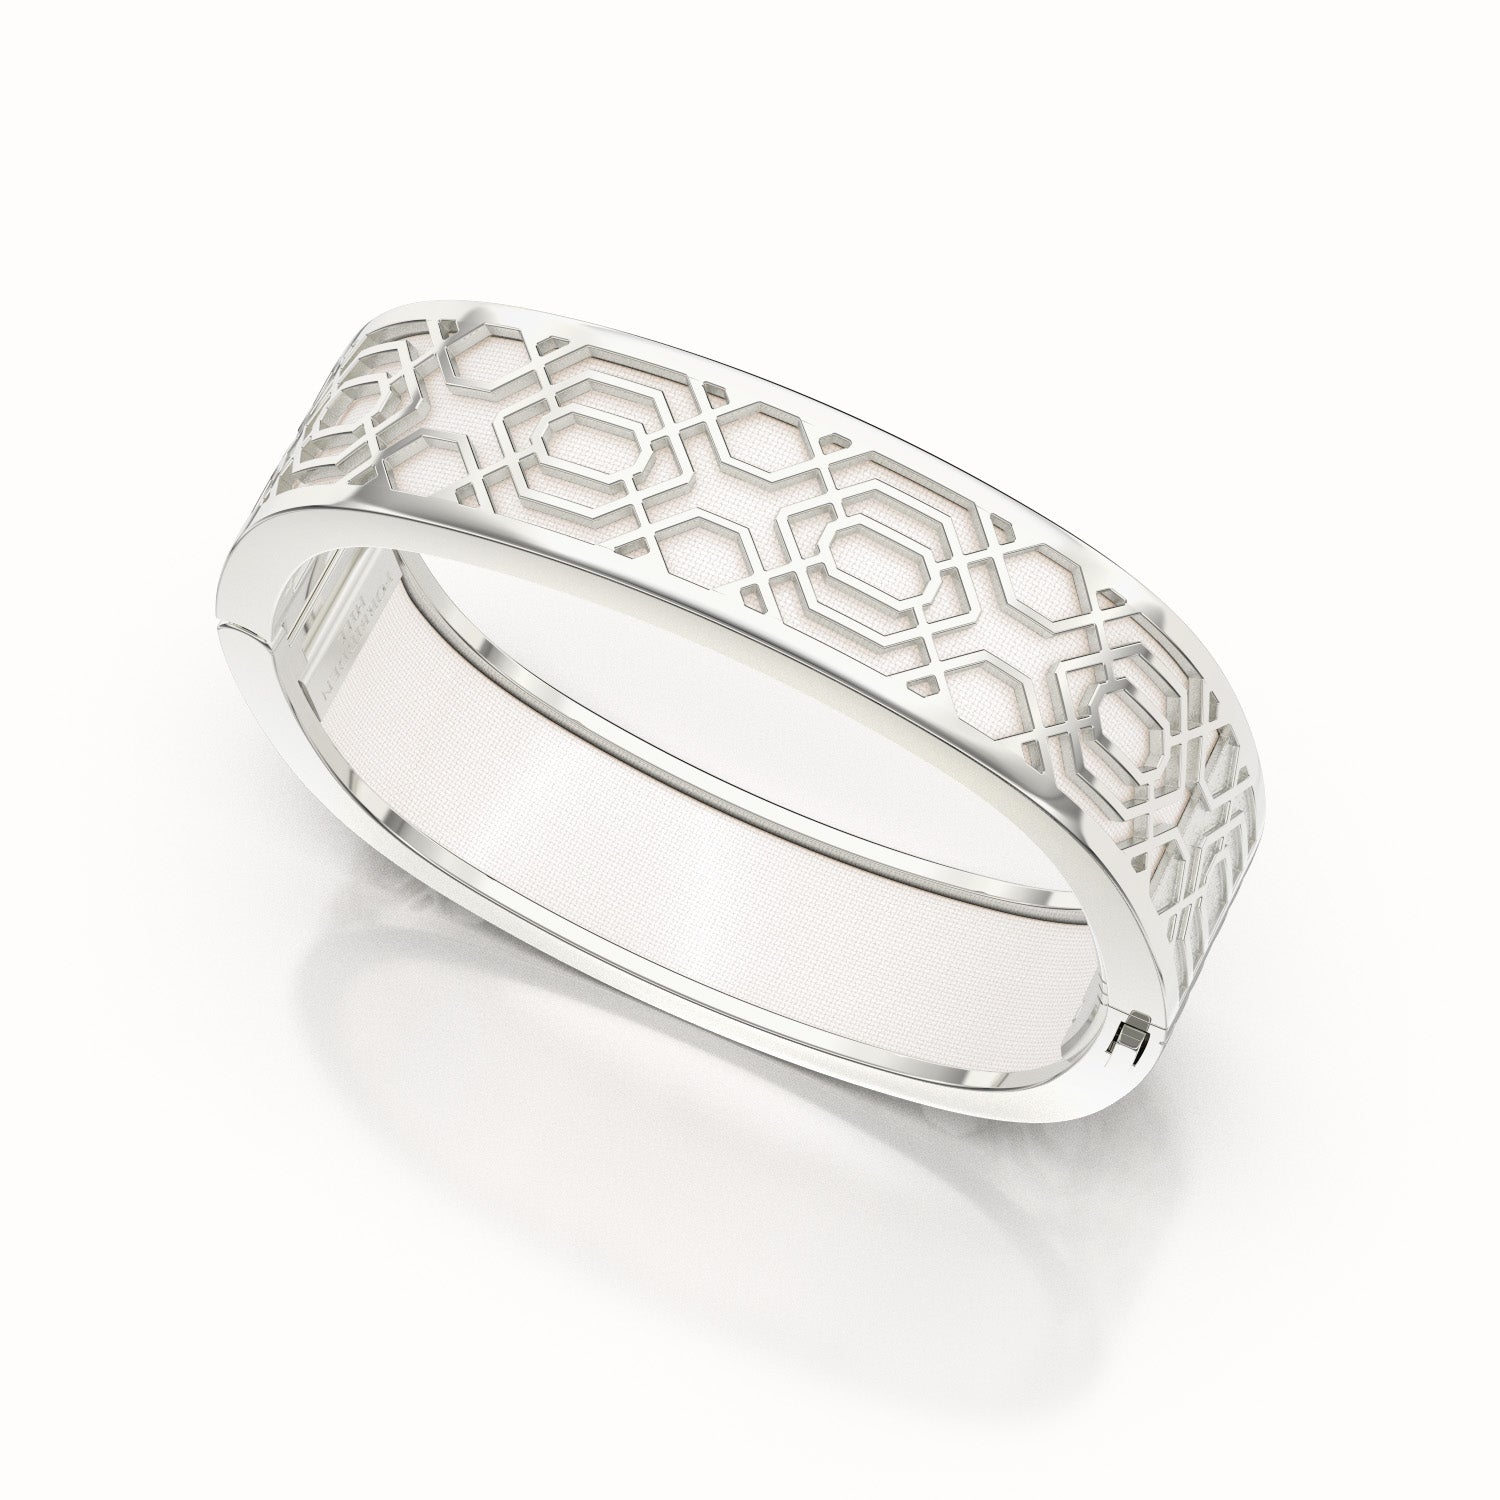 Peranakan Grace Bangle - Lychee White - Sterling Silver